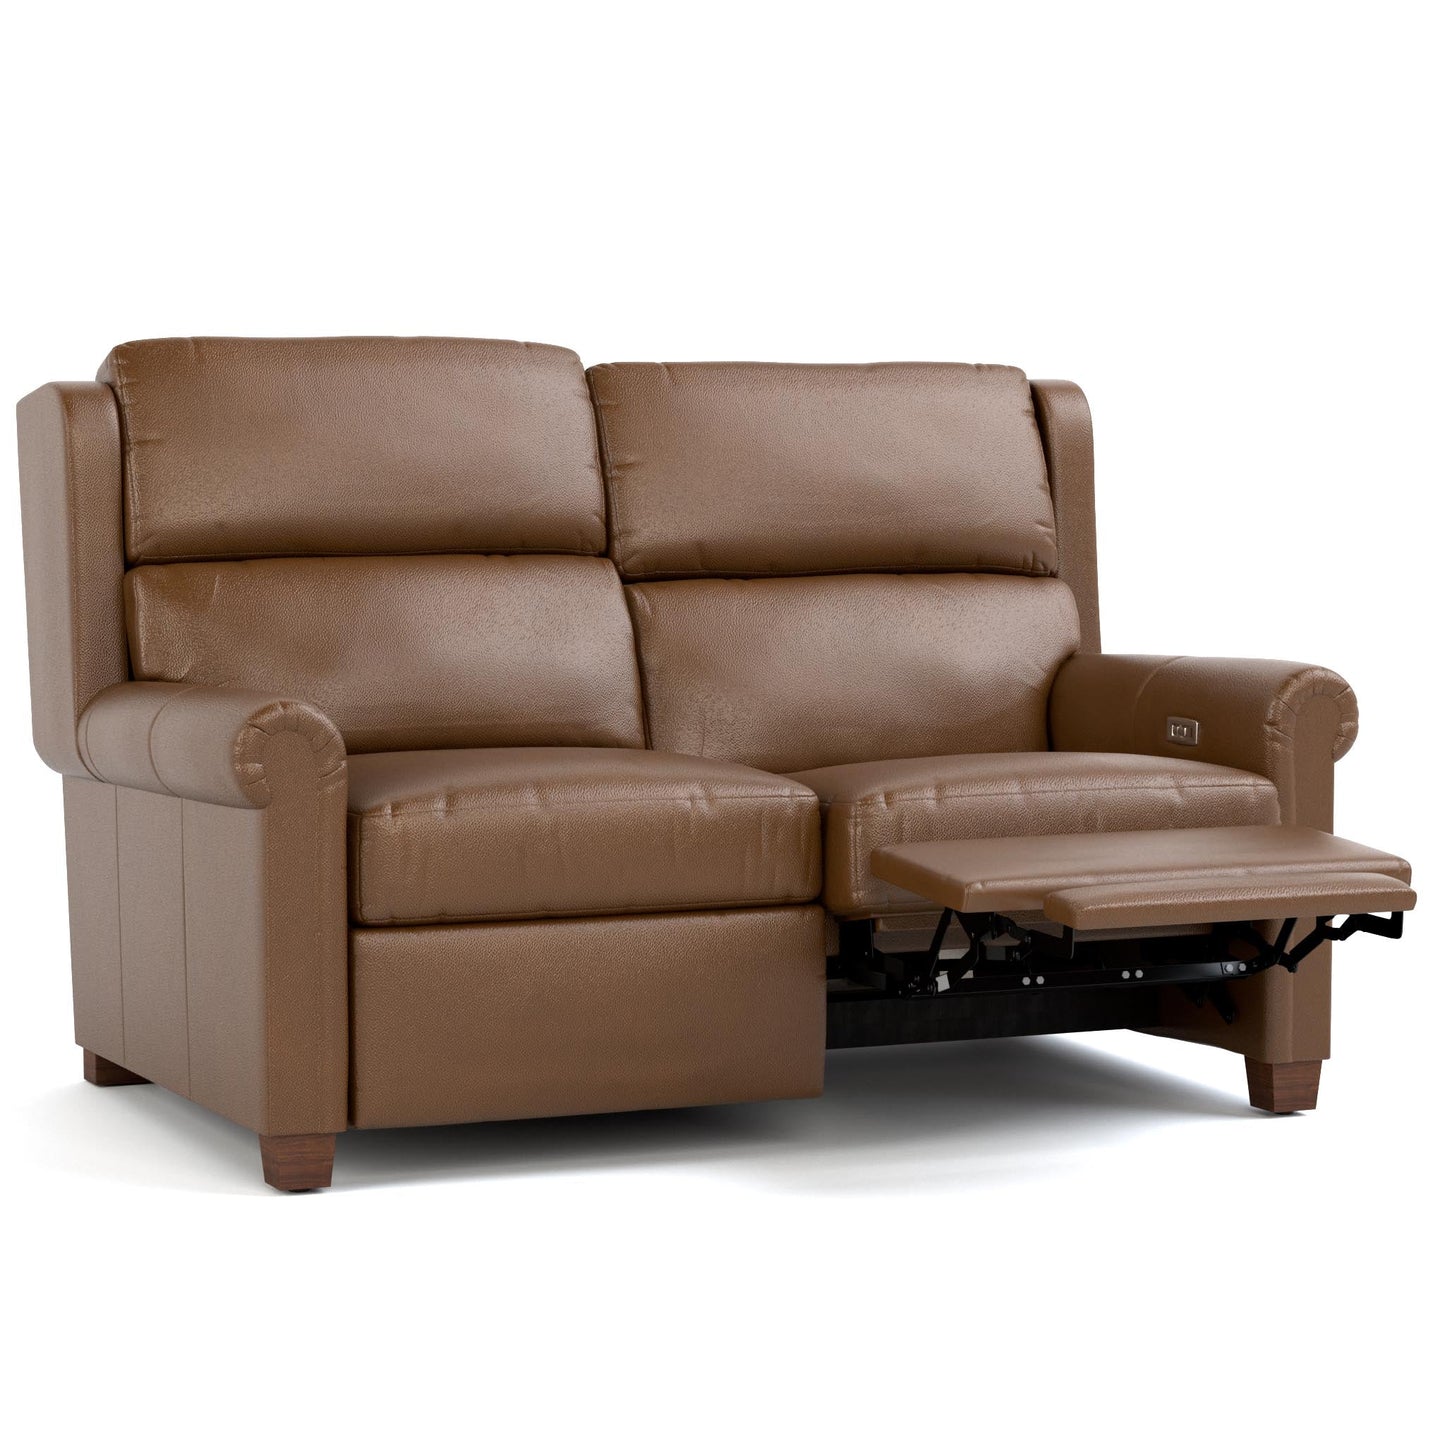 Woodlands Small Roll Arm Motion Loveseat Selvano Bark - Angle Reclined